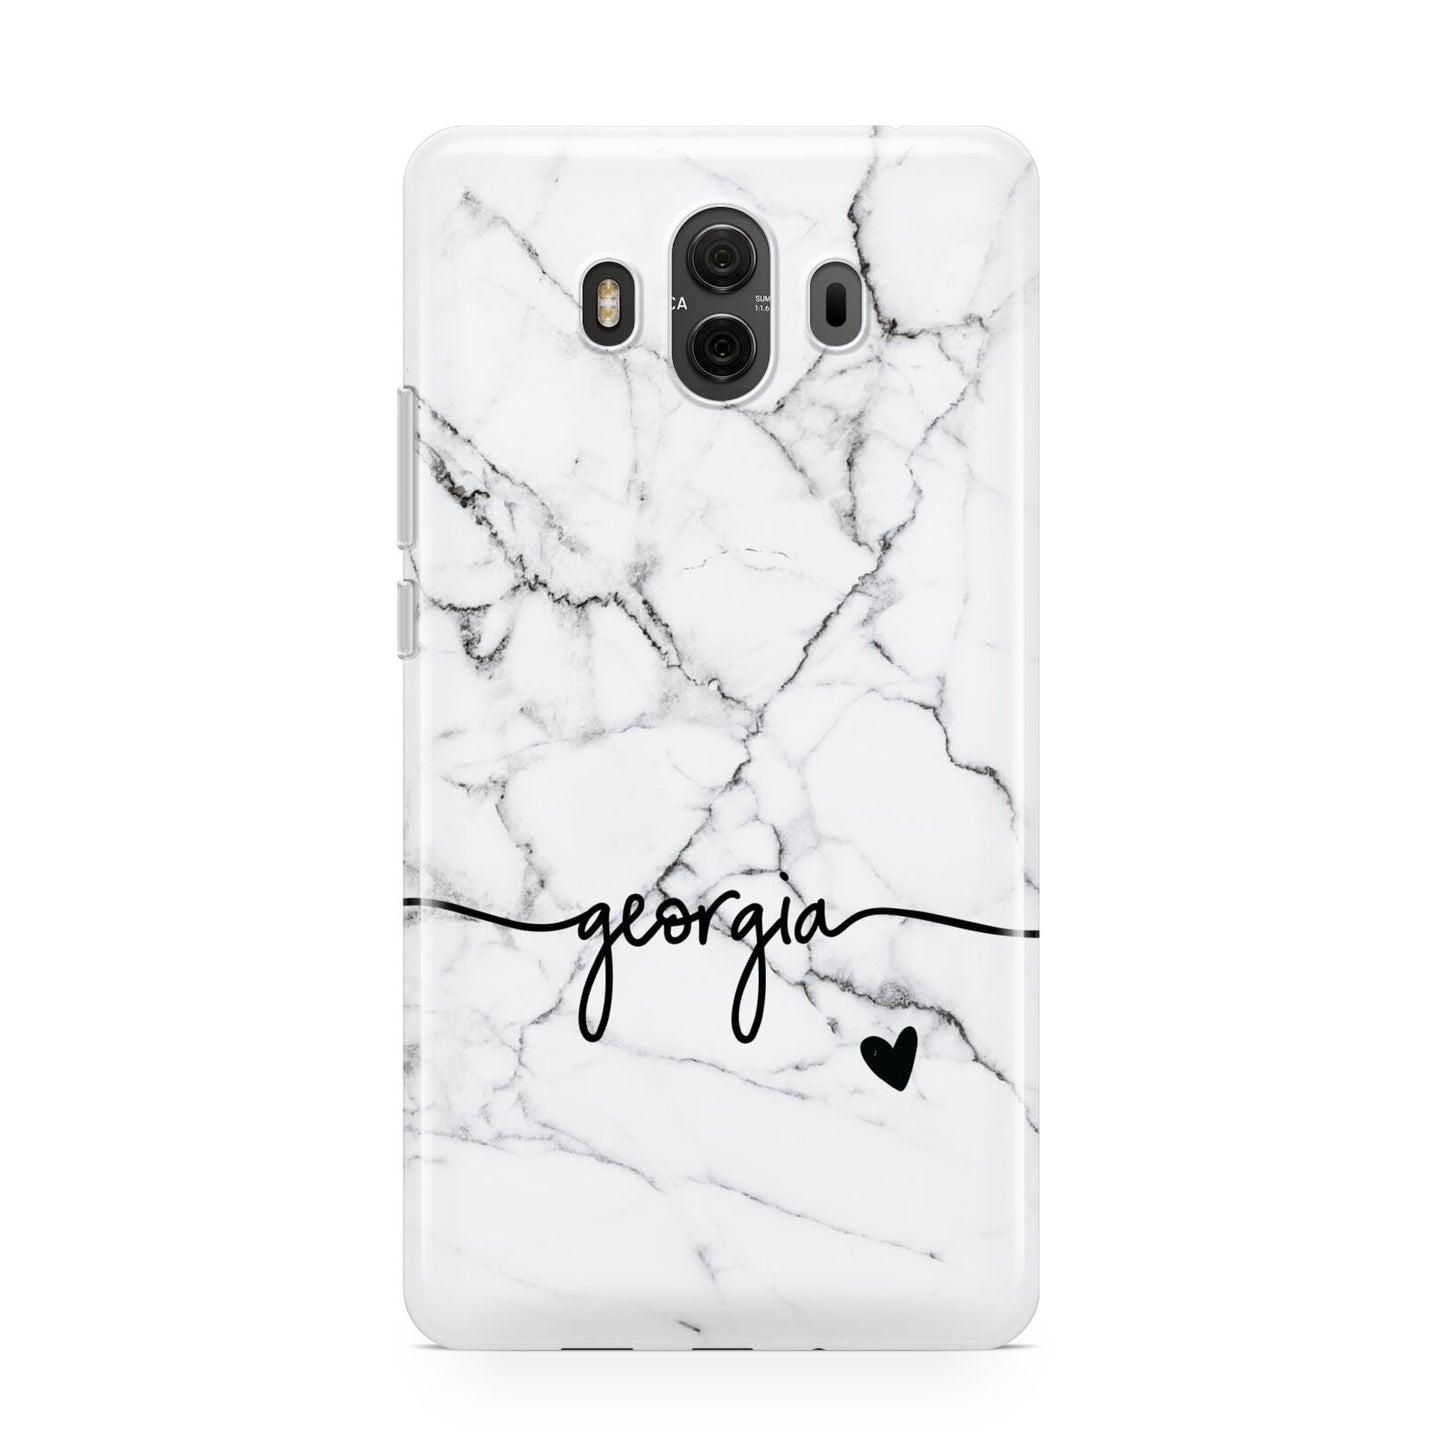 Personalised Black and White Marble with Handwriting Text Huawei Mate 10 Protective Phone Case